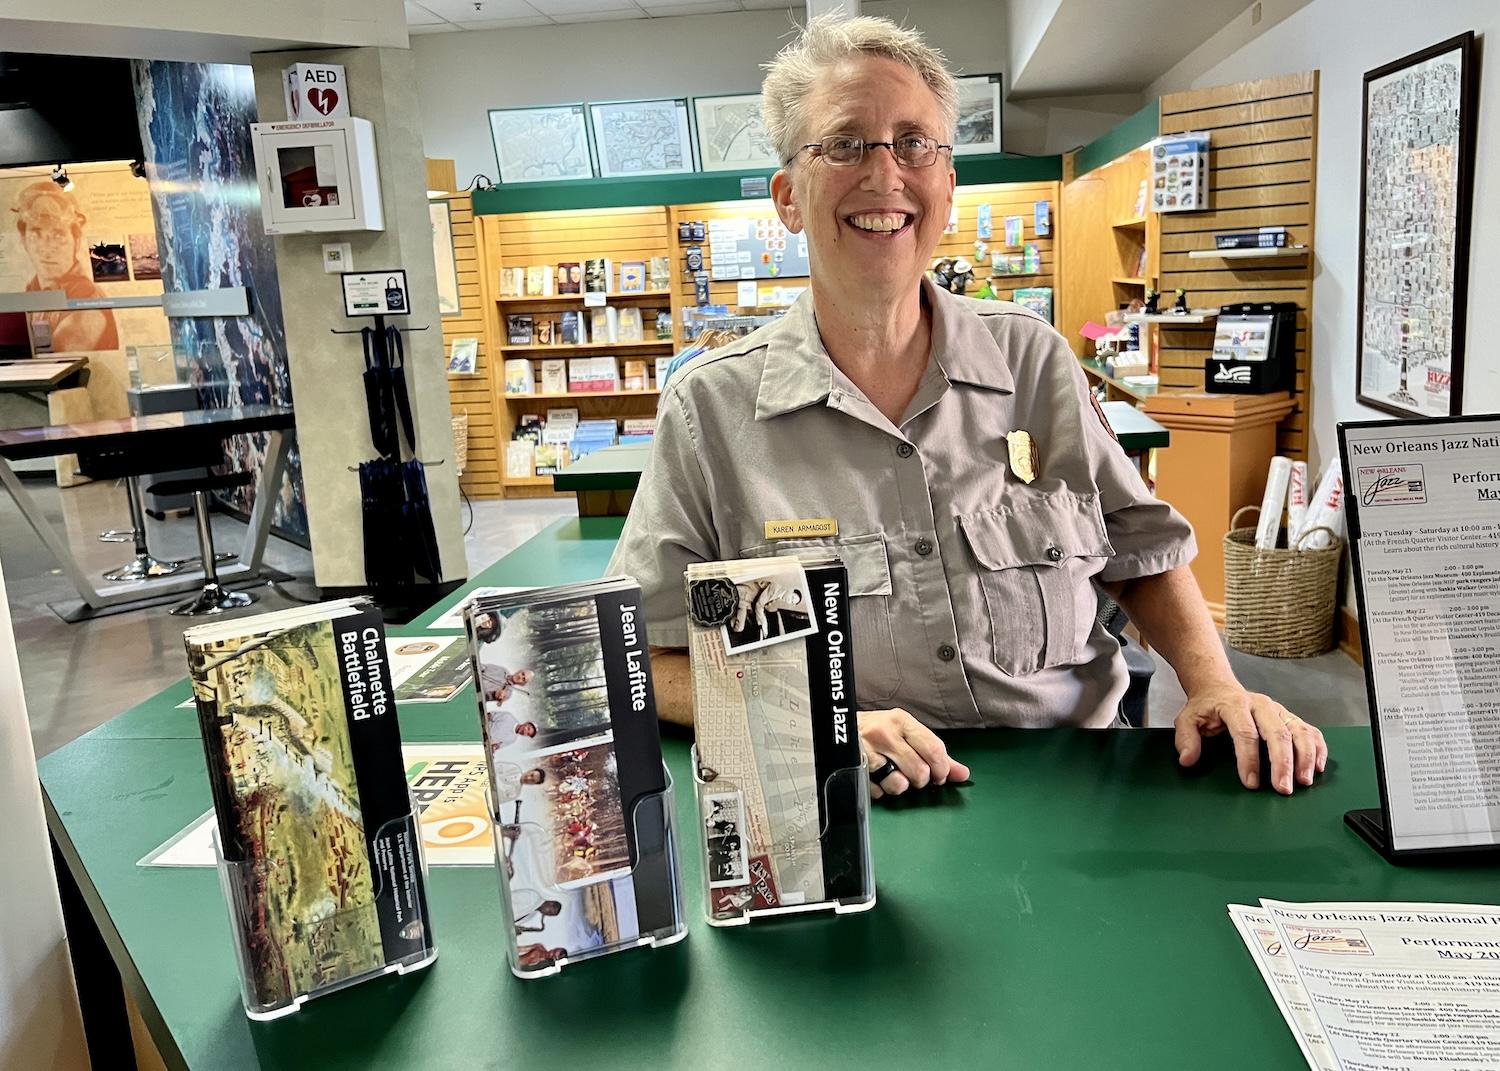 Ranger Karen Armagost works at the combined visitor center for New Orleans Jazz and Jean Latiffe national historical parks. 